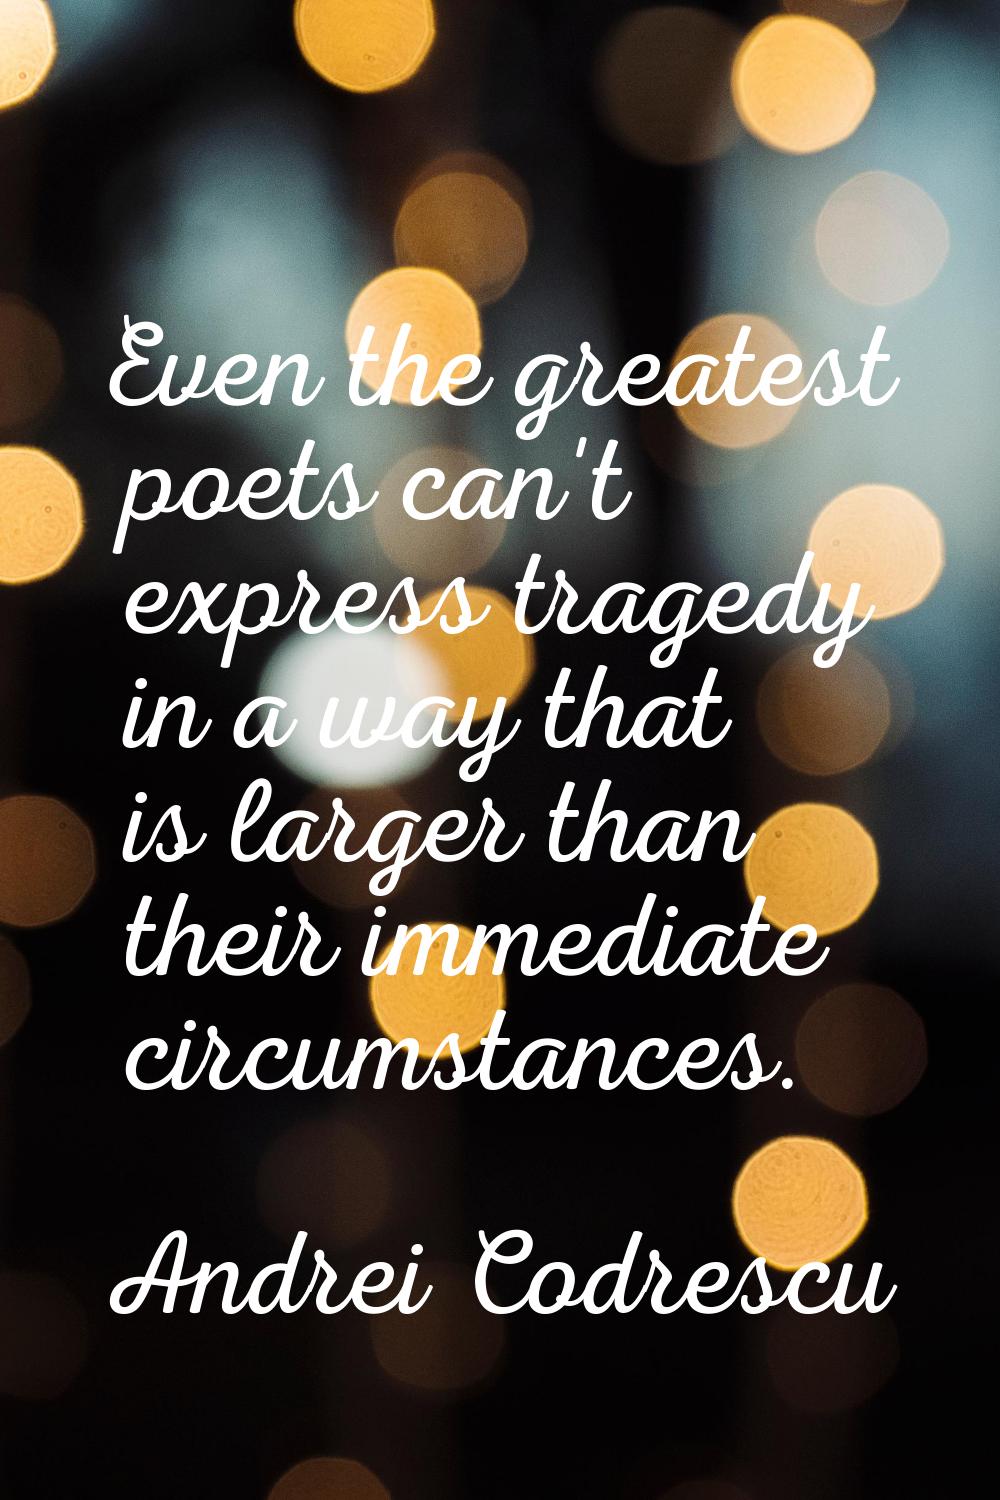 Even the greatest poets can't express tragedy in a way that is larger than their immediate circumst